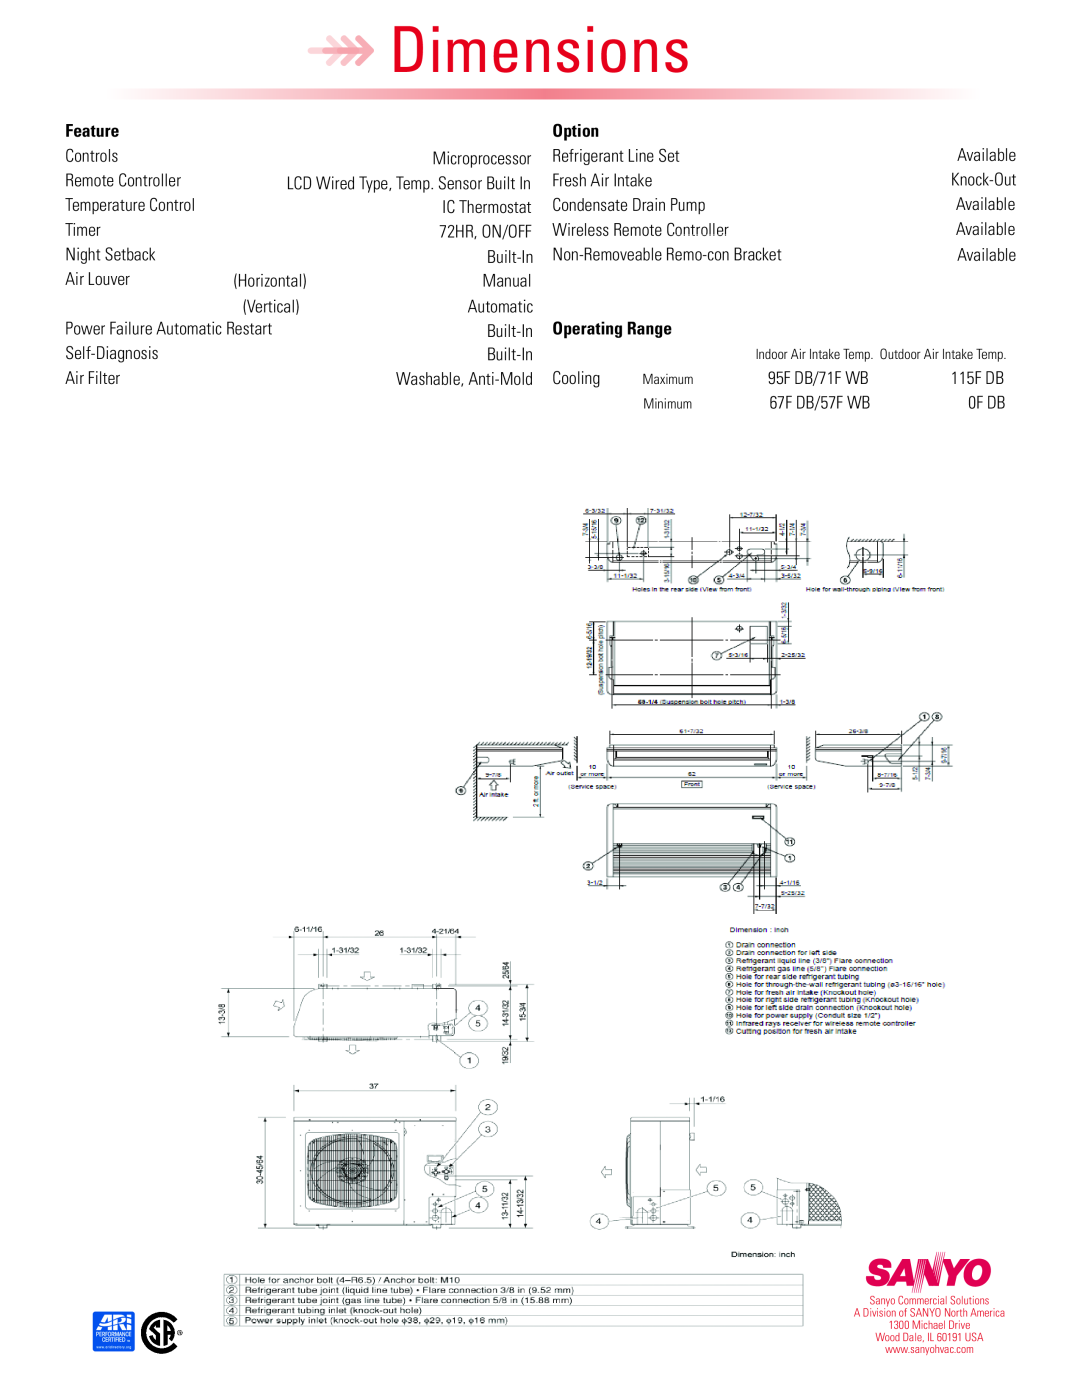 Sanyo THW2672R, 26TW72R dimensions Dimensions, Feature, Option, Operating Range 